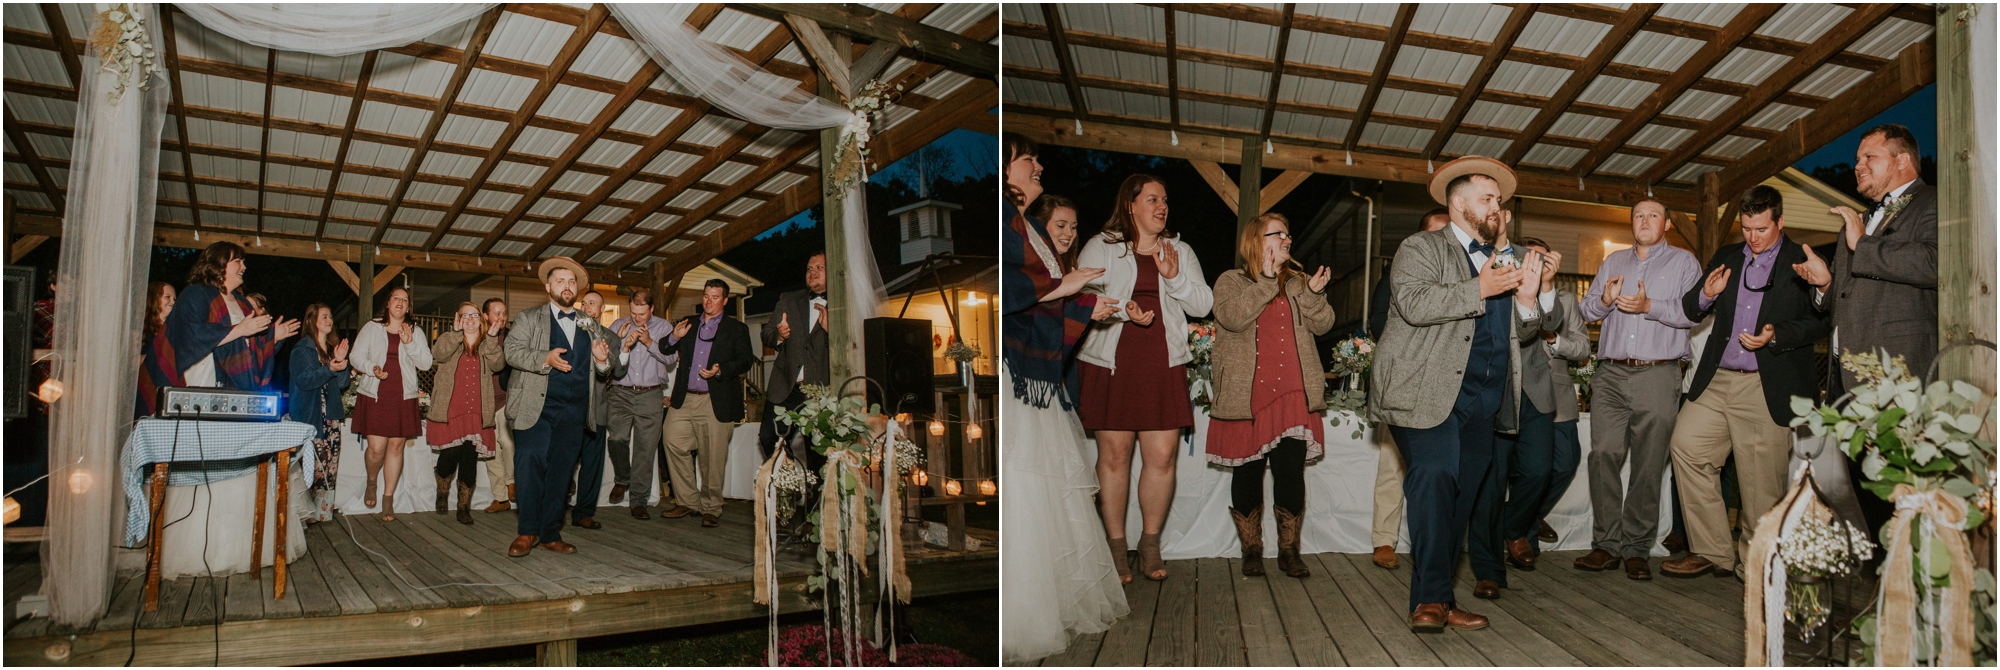 caryville-robbins-middle-tennessee-intimate-cozy-fall-navy-rustic-backyard-wedding_0137.jpg